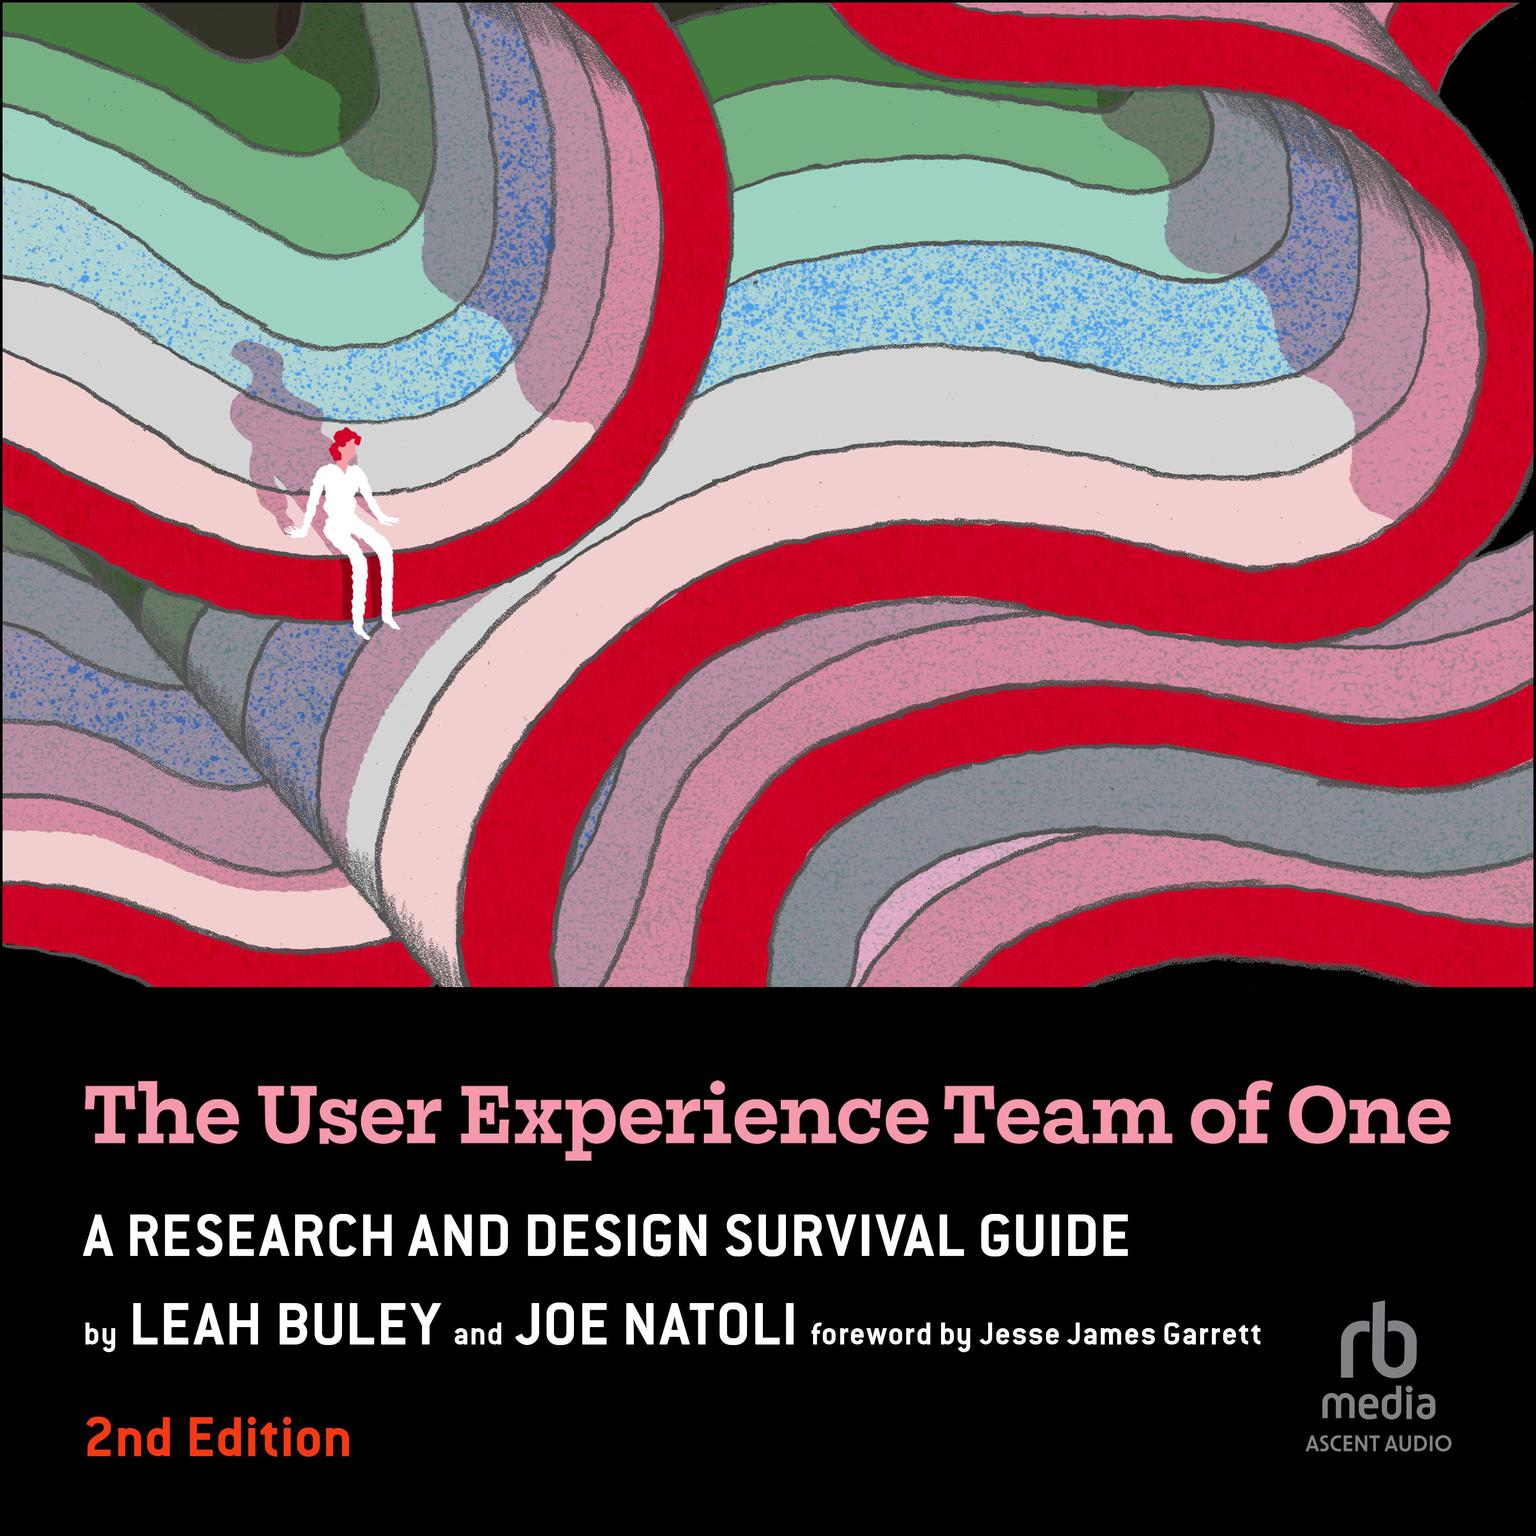 The User Experience Team of One, 2nd Edition: A Research and Design Survival Guide Audiobook, by Leah Buley